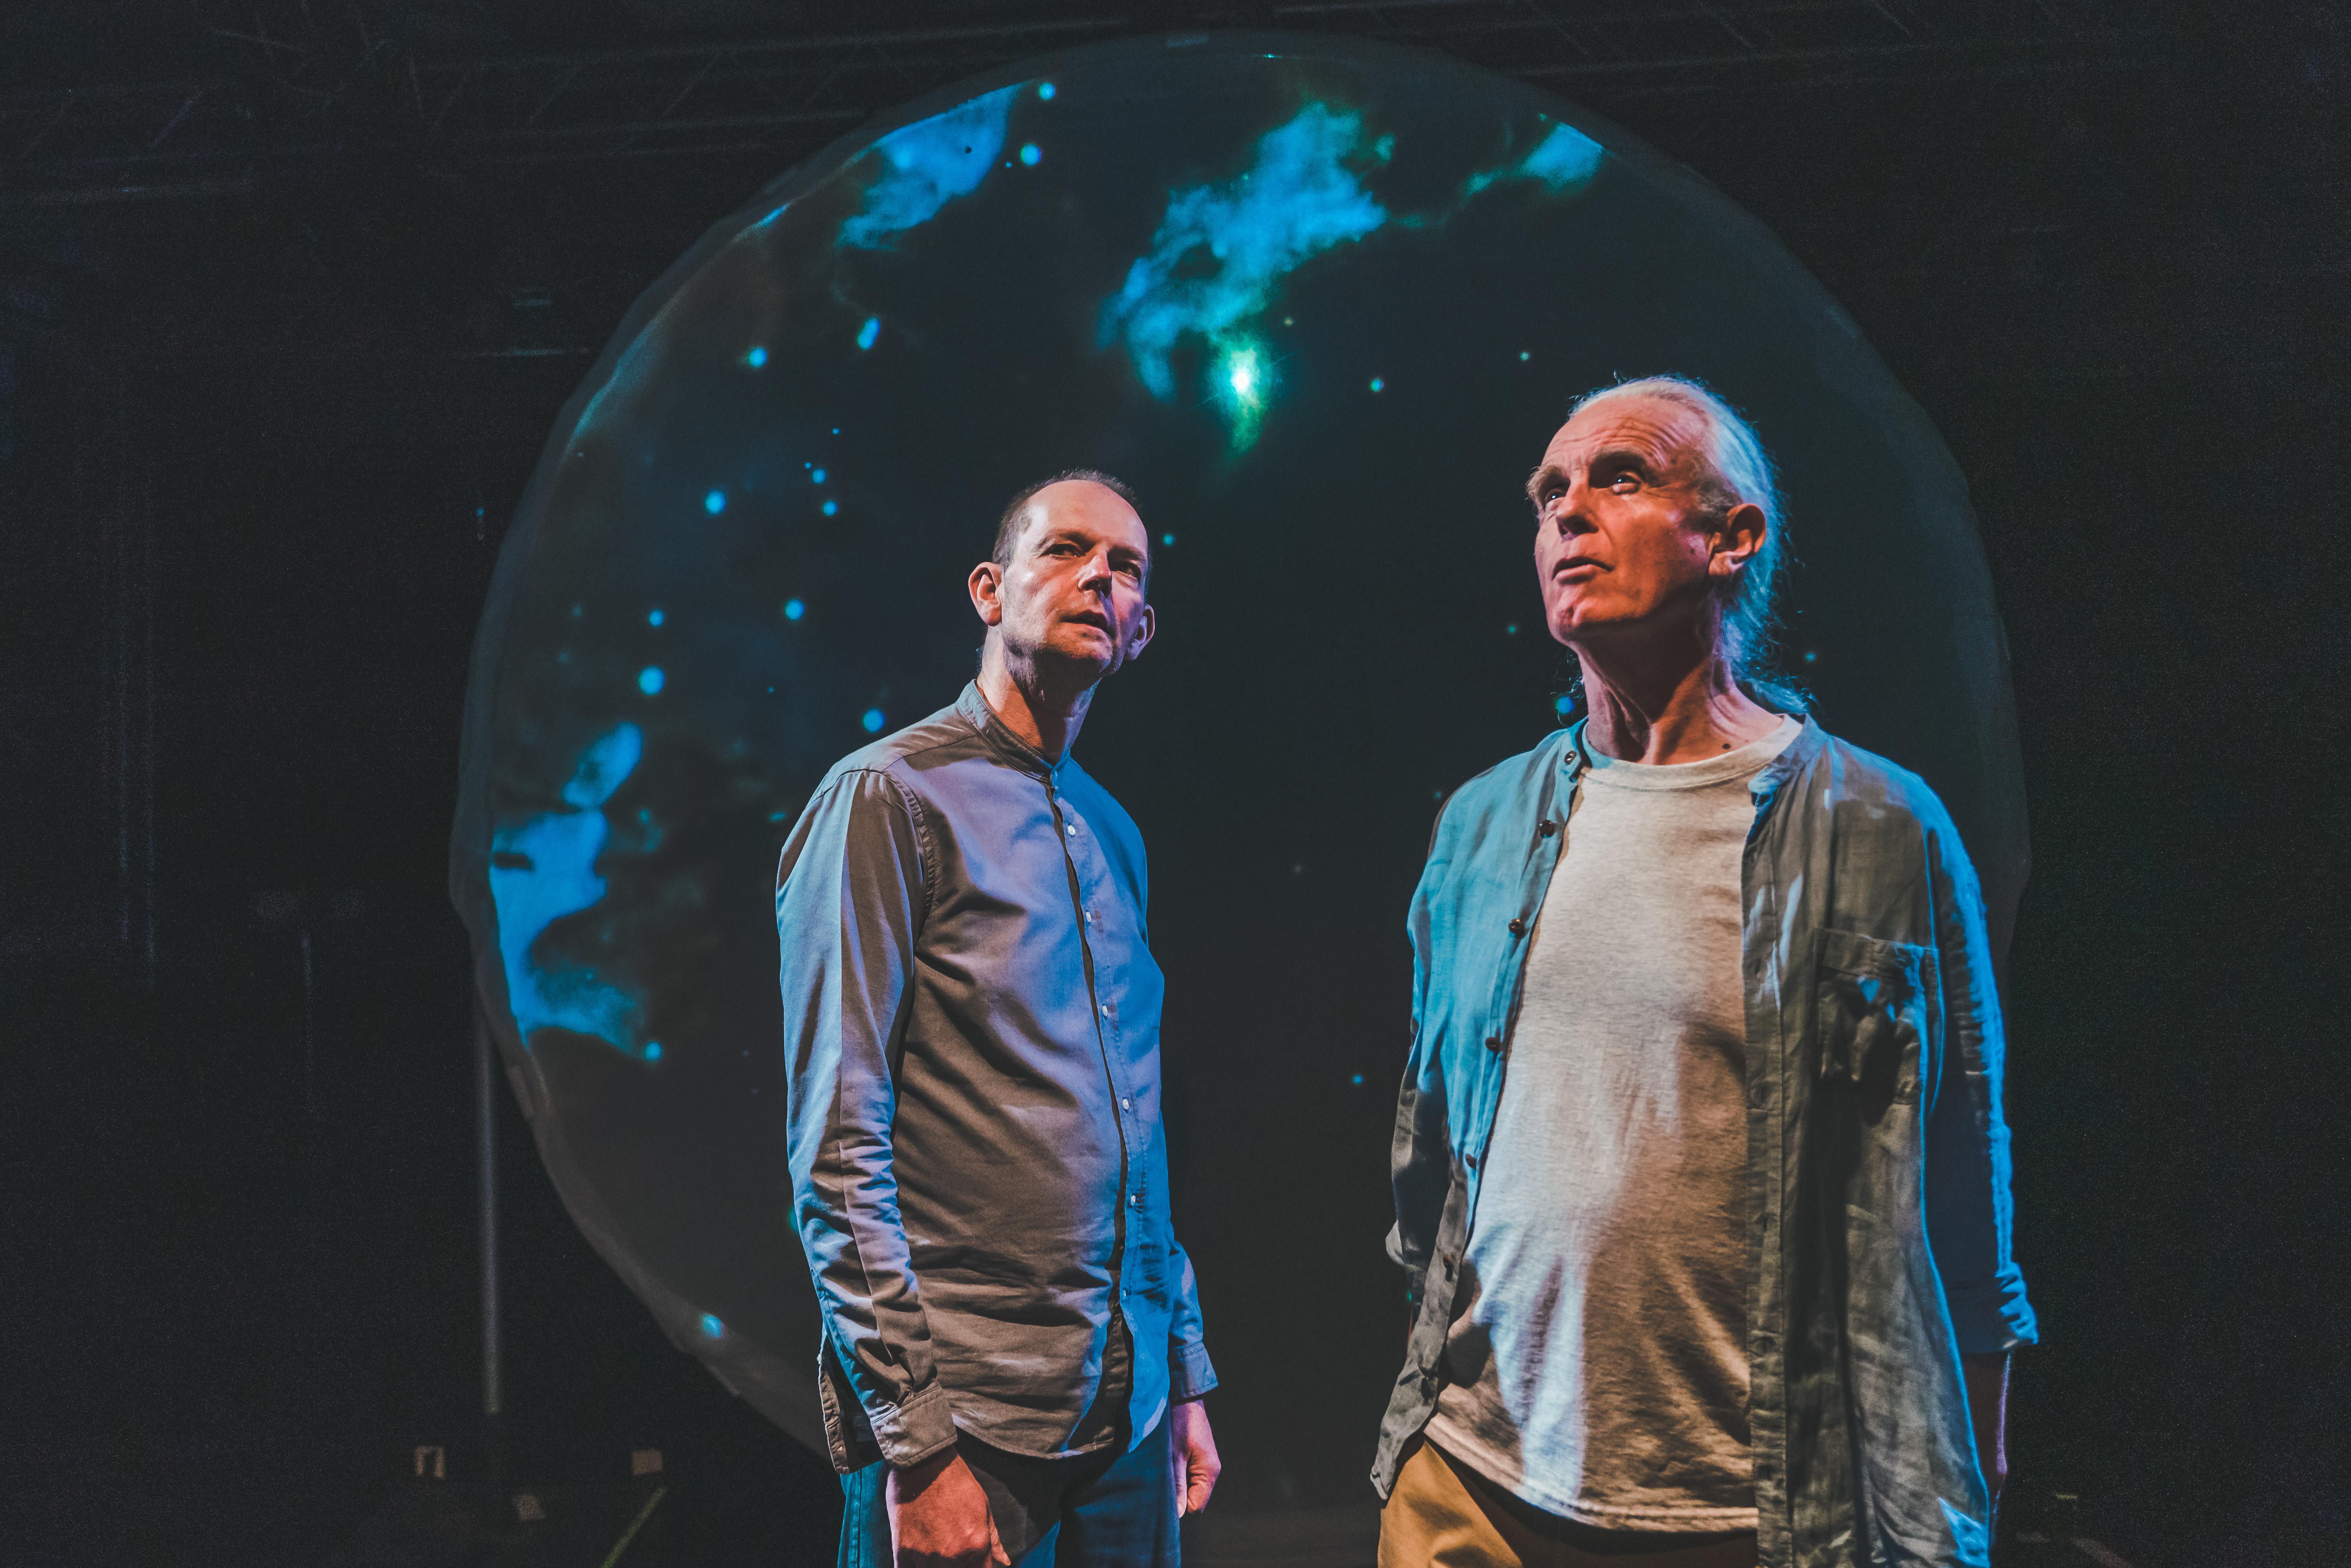 Daniel Morden and Hugh Lupton stand in front of a large disc covered in cosmic projections